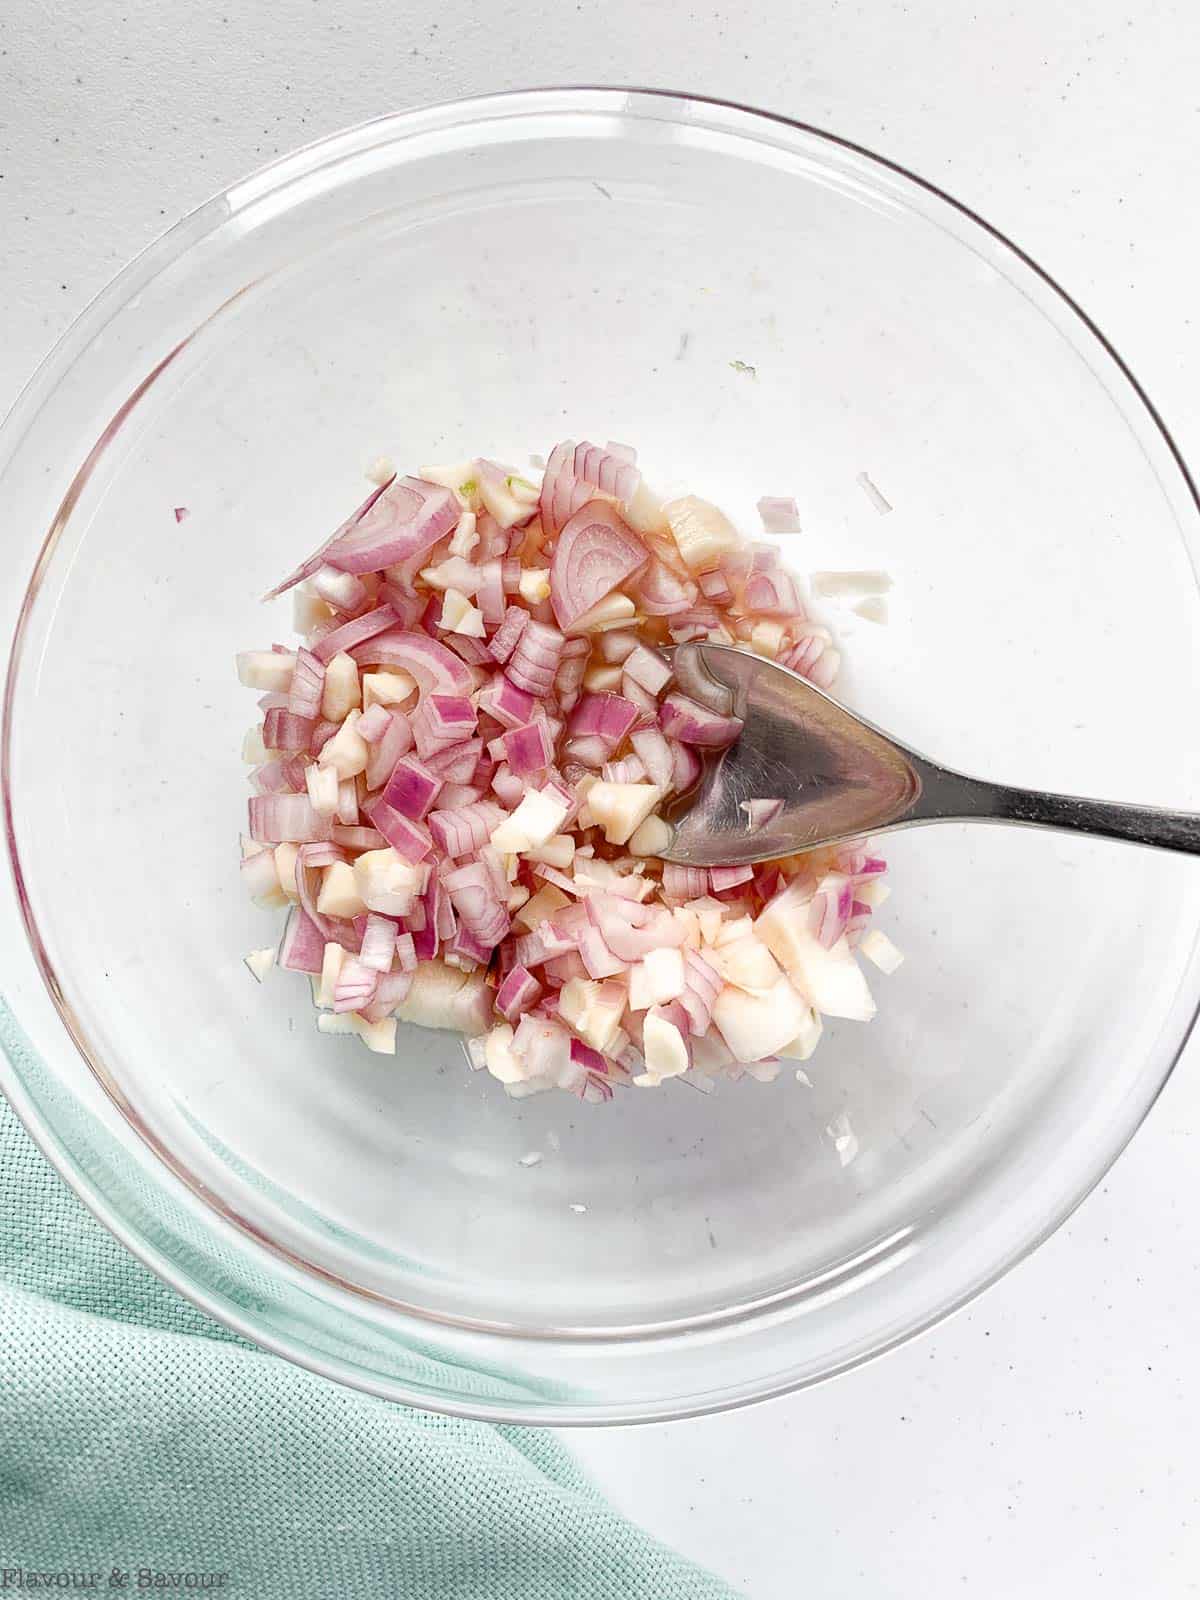 Garlic and shallot in red wine vinegar.